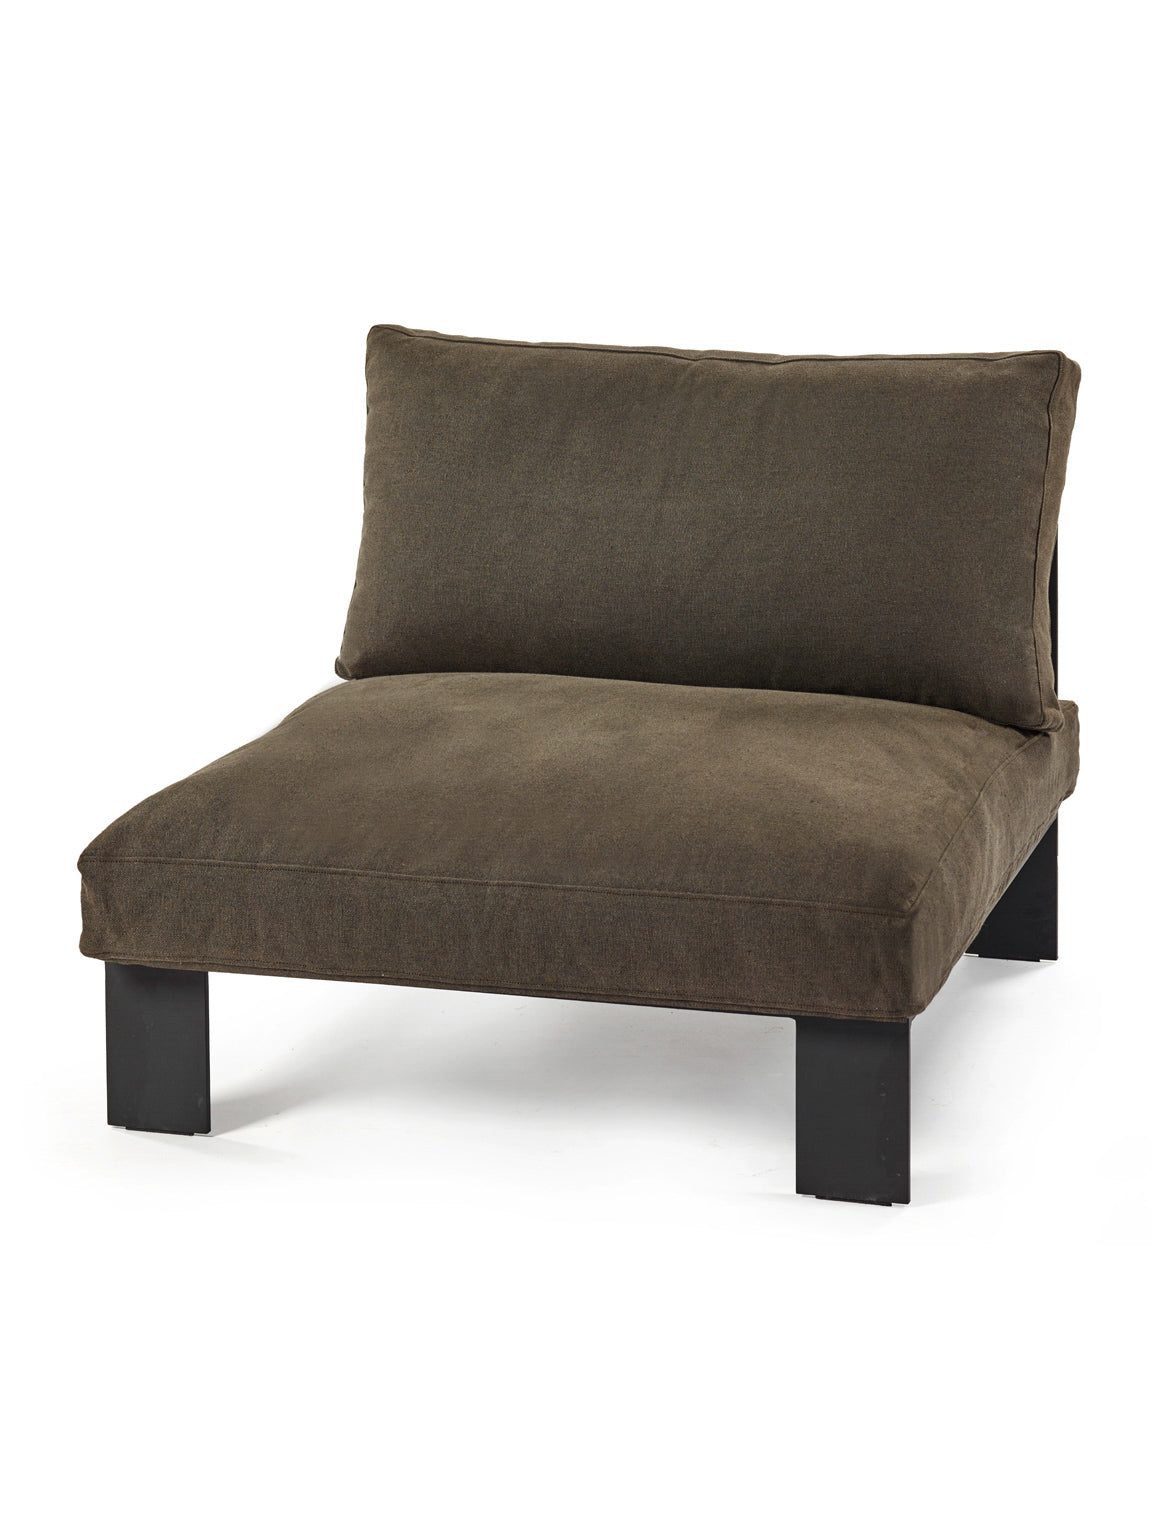 Mombaers Outdoor Lounge Chair - Umber - THAT COOL LIVING